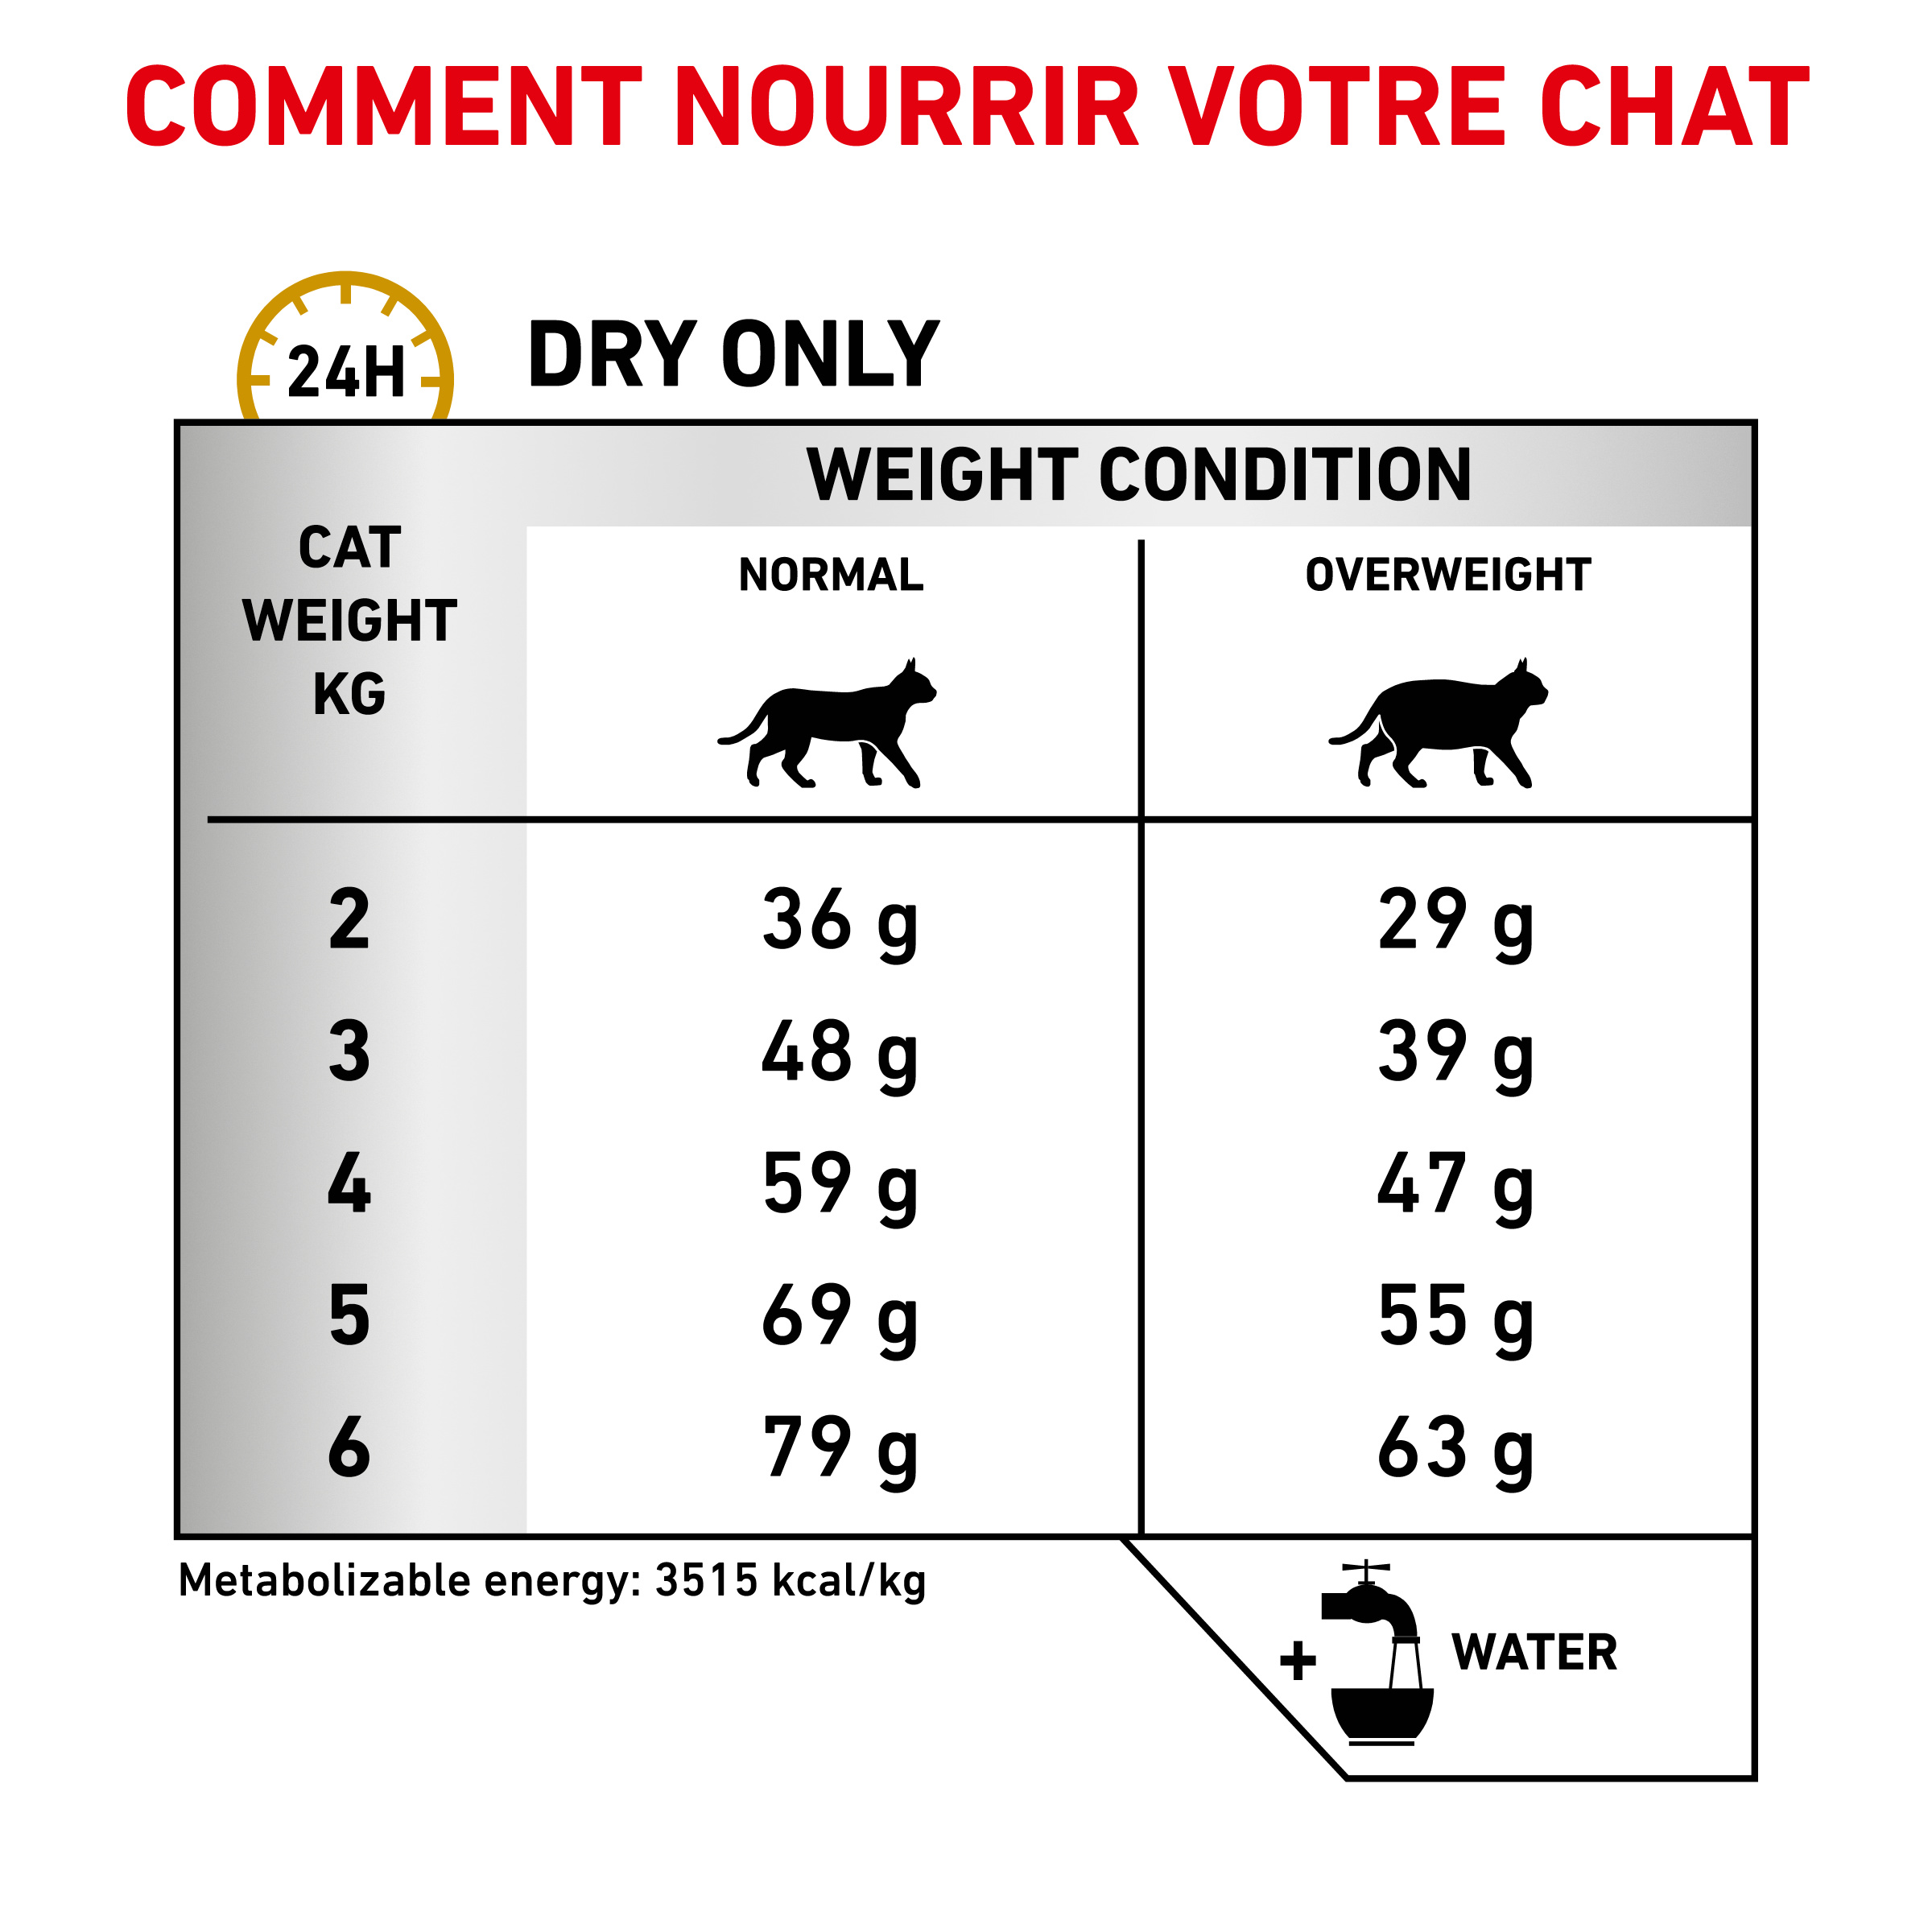 Royal Canin Urinary S/O Moderare Calorie pour chat 9kg - Croquettes Chat -  Croquettes & alimentation Royal Canin Veterinary Diet